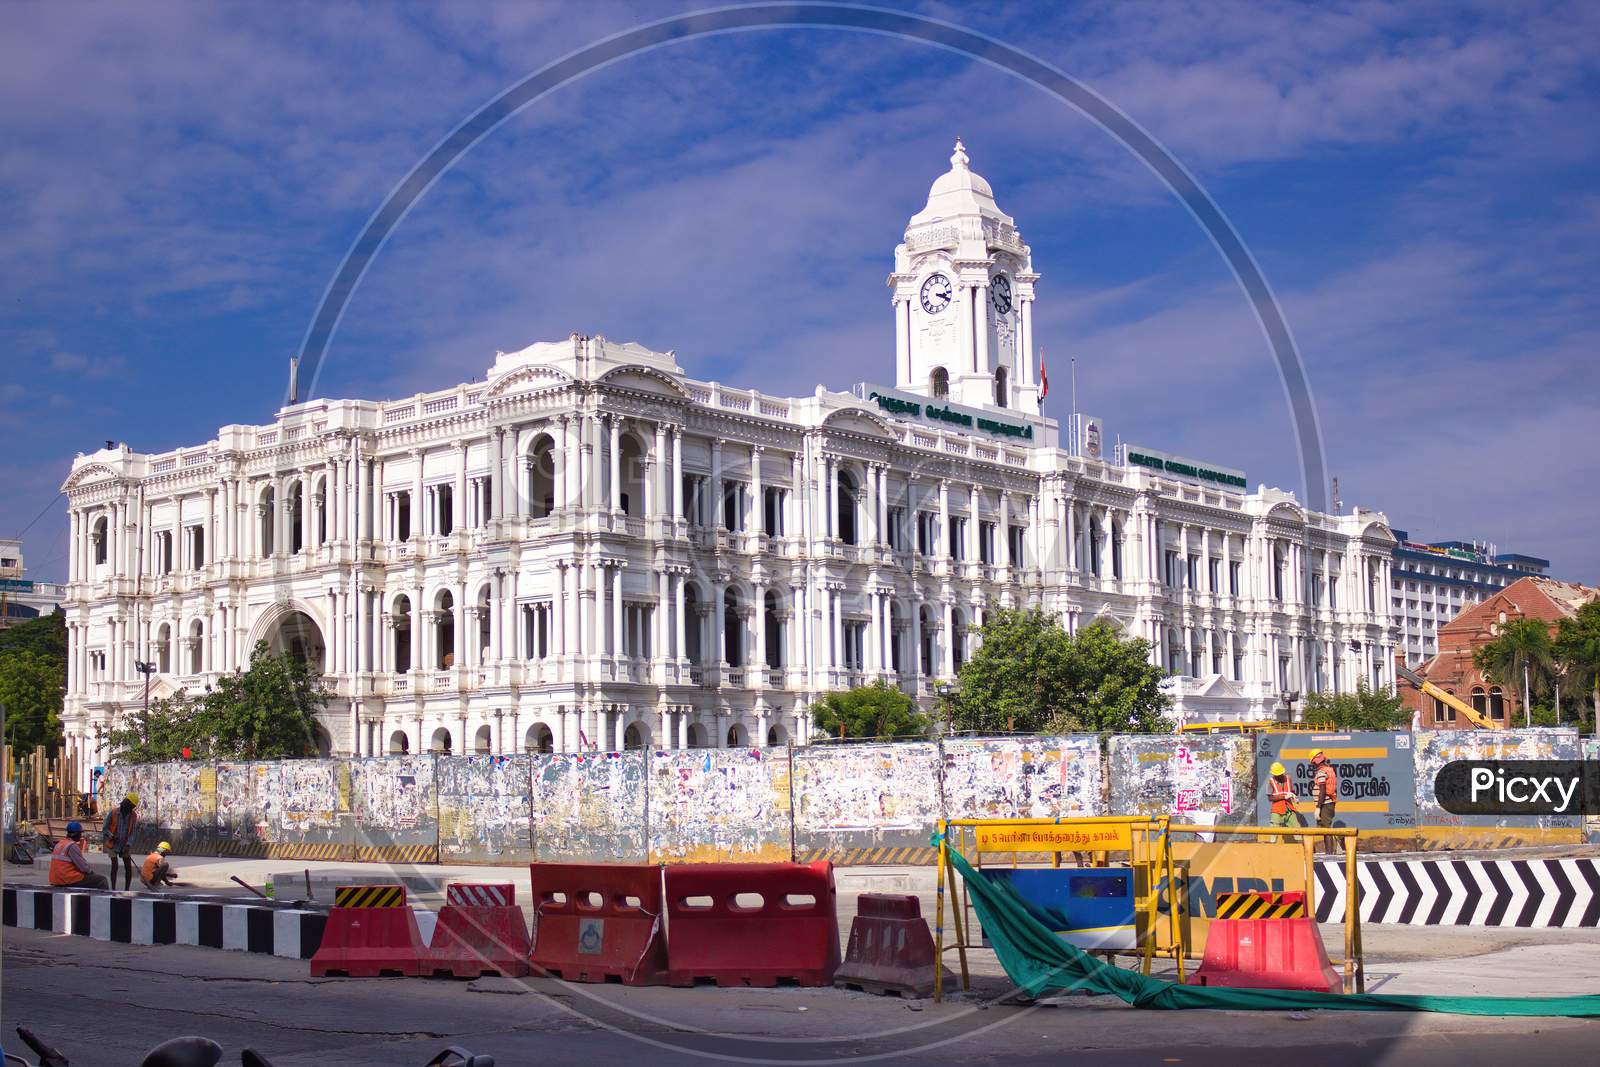 Chennai, India - October 29, 2020: Greater Chennai Corporation Building Which Is The Chennai Municipal Corporation Civic Body That Governs The City